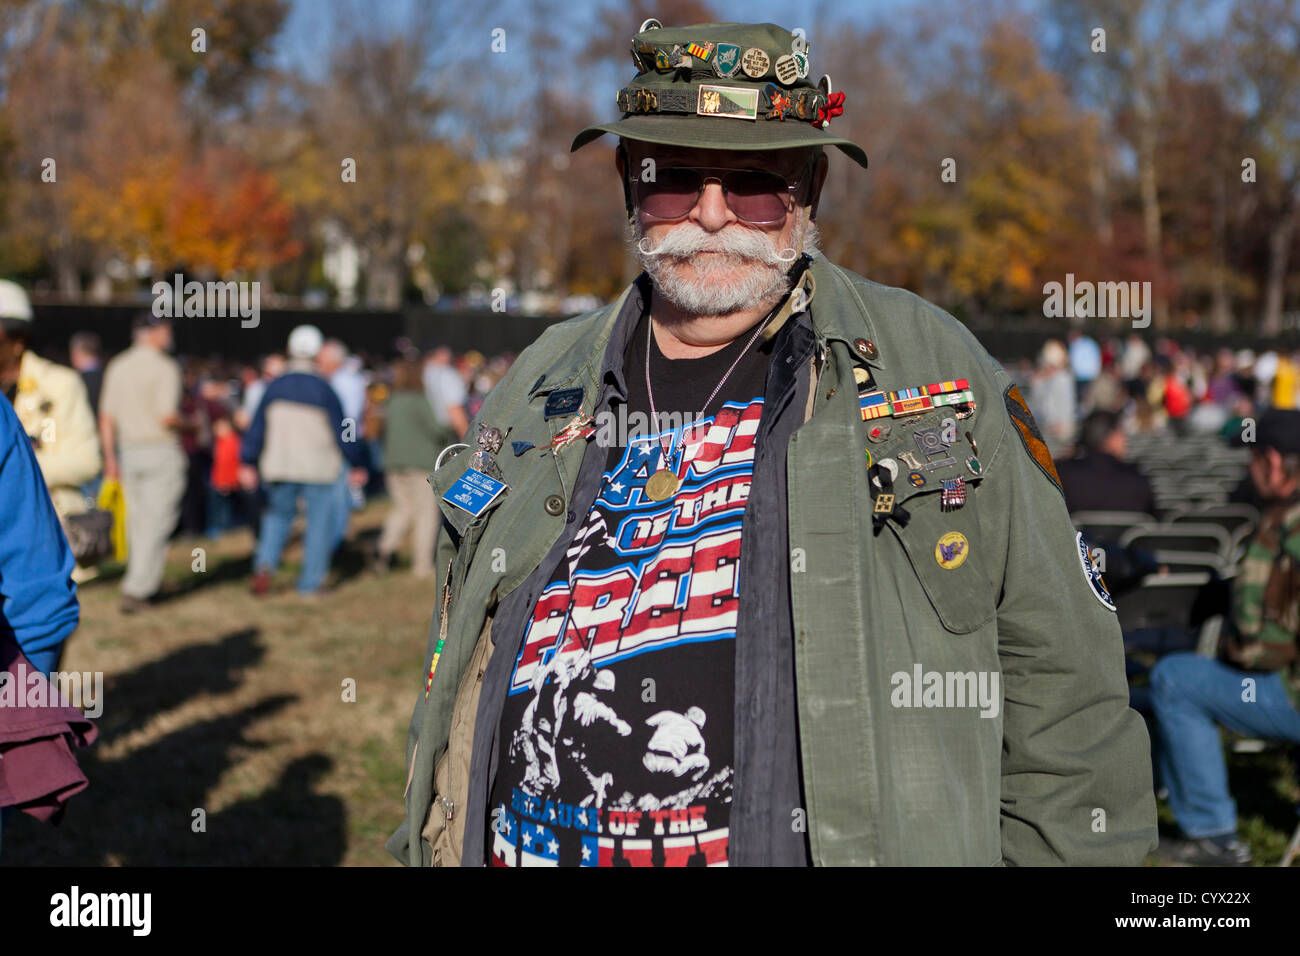 November 11, 2012: A Vietnam veteran sporting multiple badges and other memorabilia stands in front of the Vietnam War Memorial, during the Veterans Day celebrations - Washington, DC USA Stock Photo